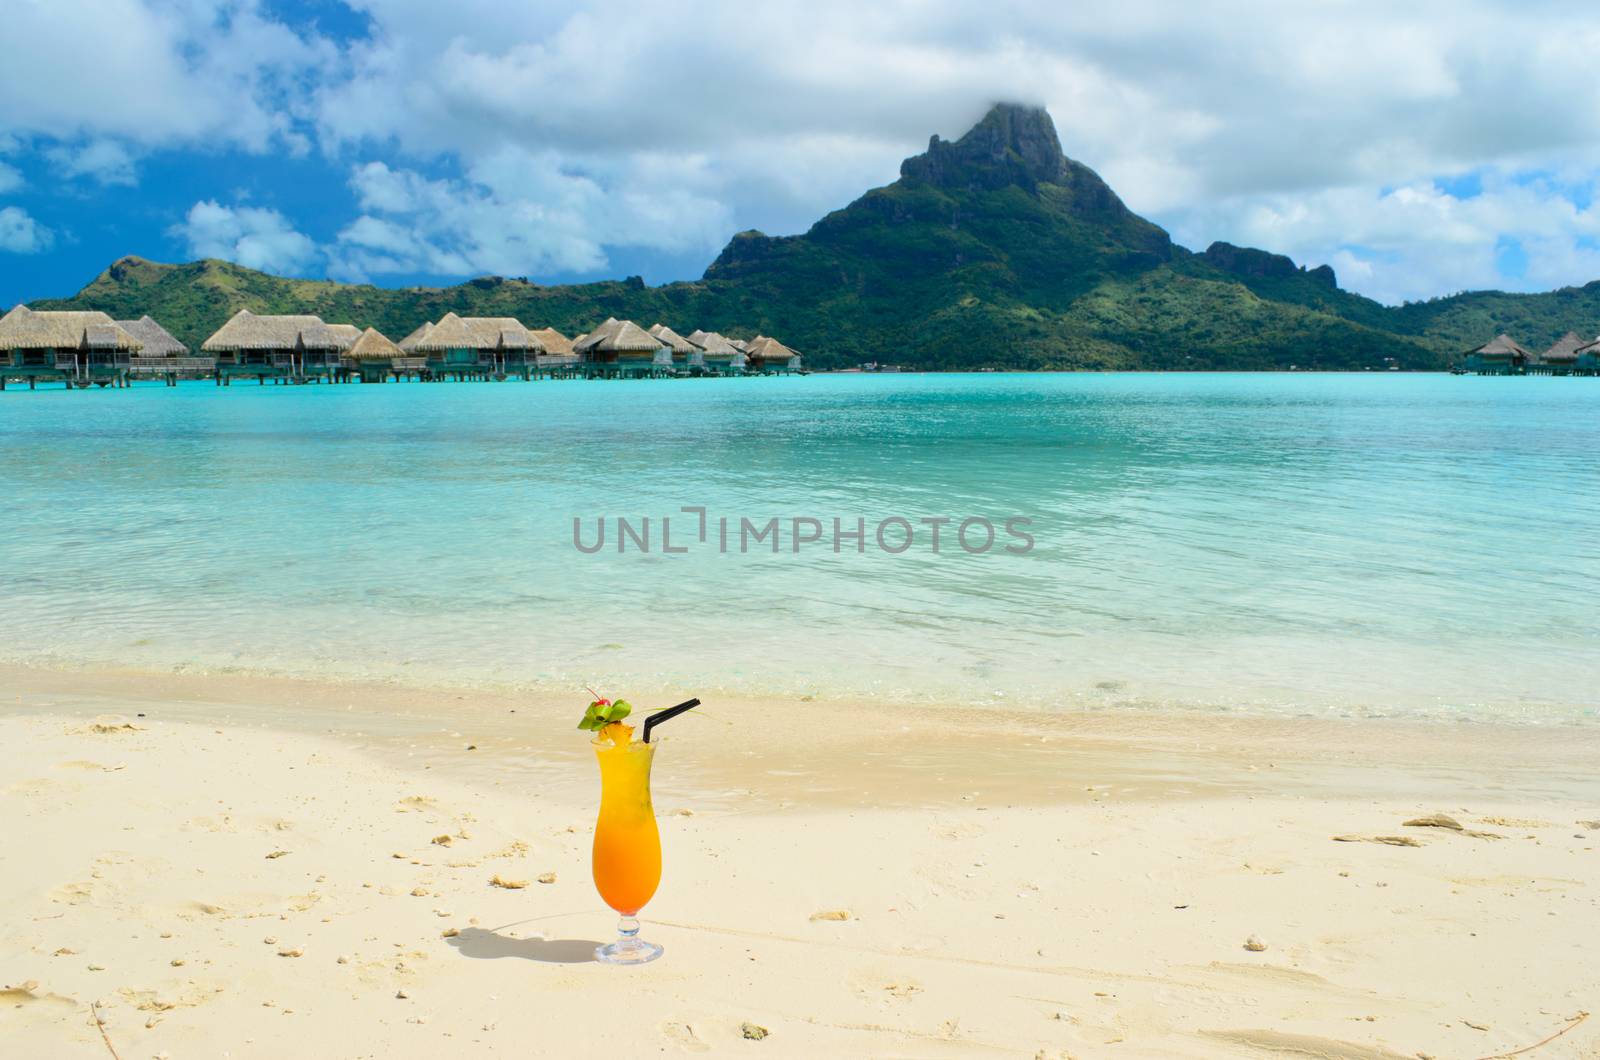 Sex on the beach cocktail on the beach of a luxury vacation resort in the lagoon with a view on the tropical island of Bora Bora, near Tahiti, in French Polynesia.